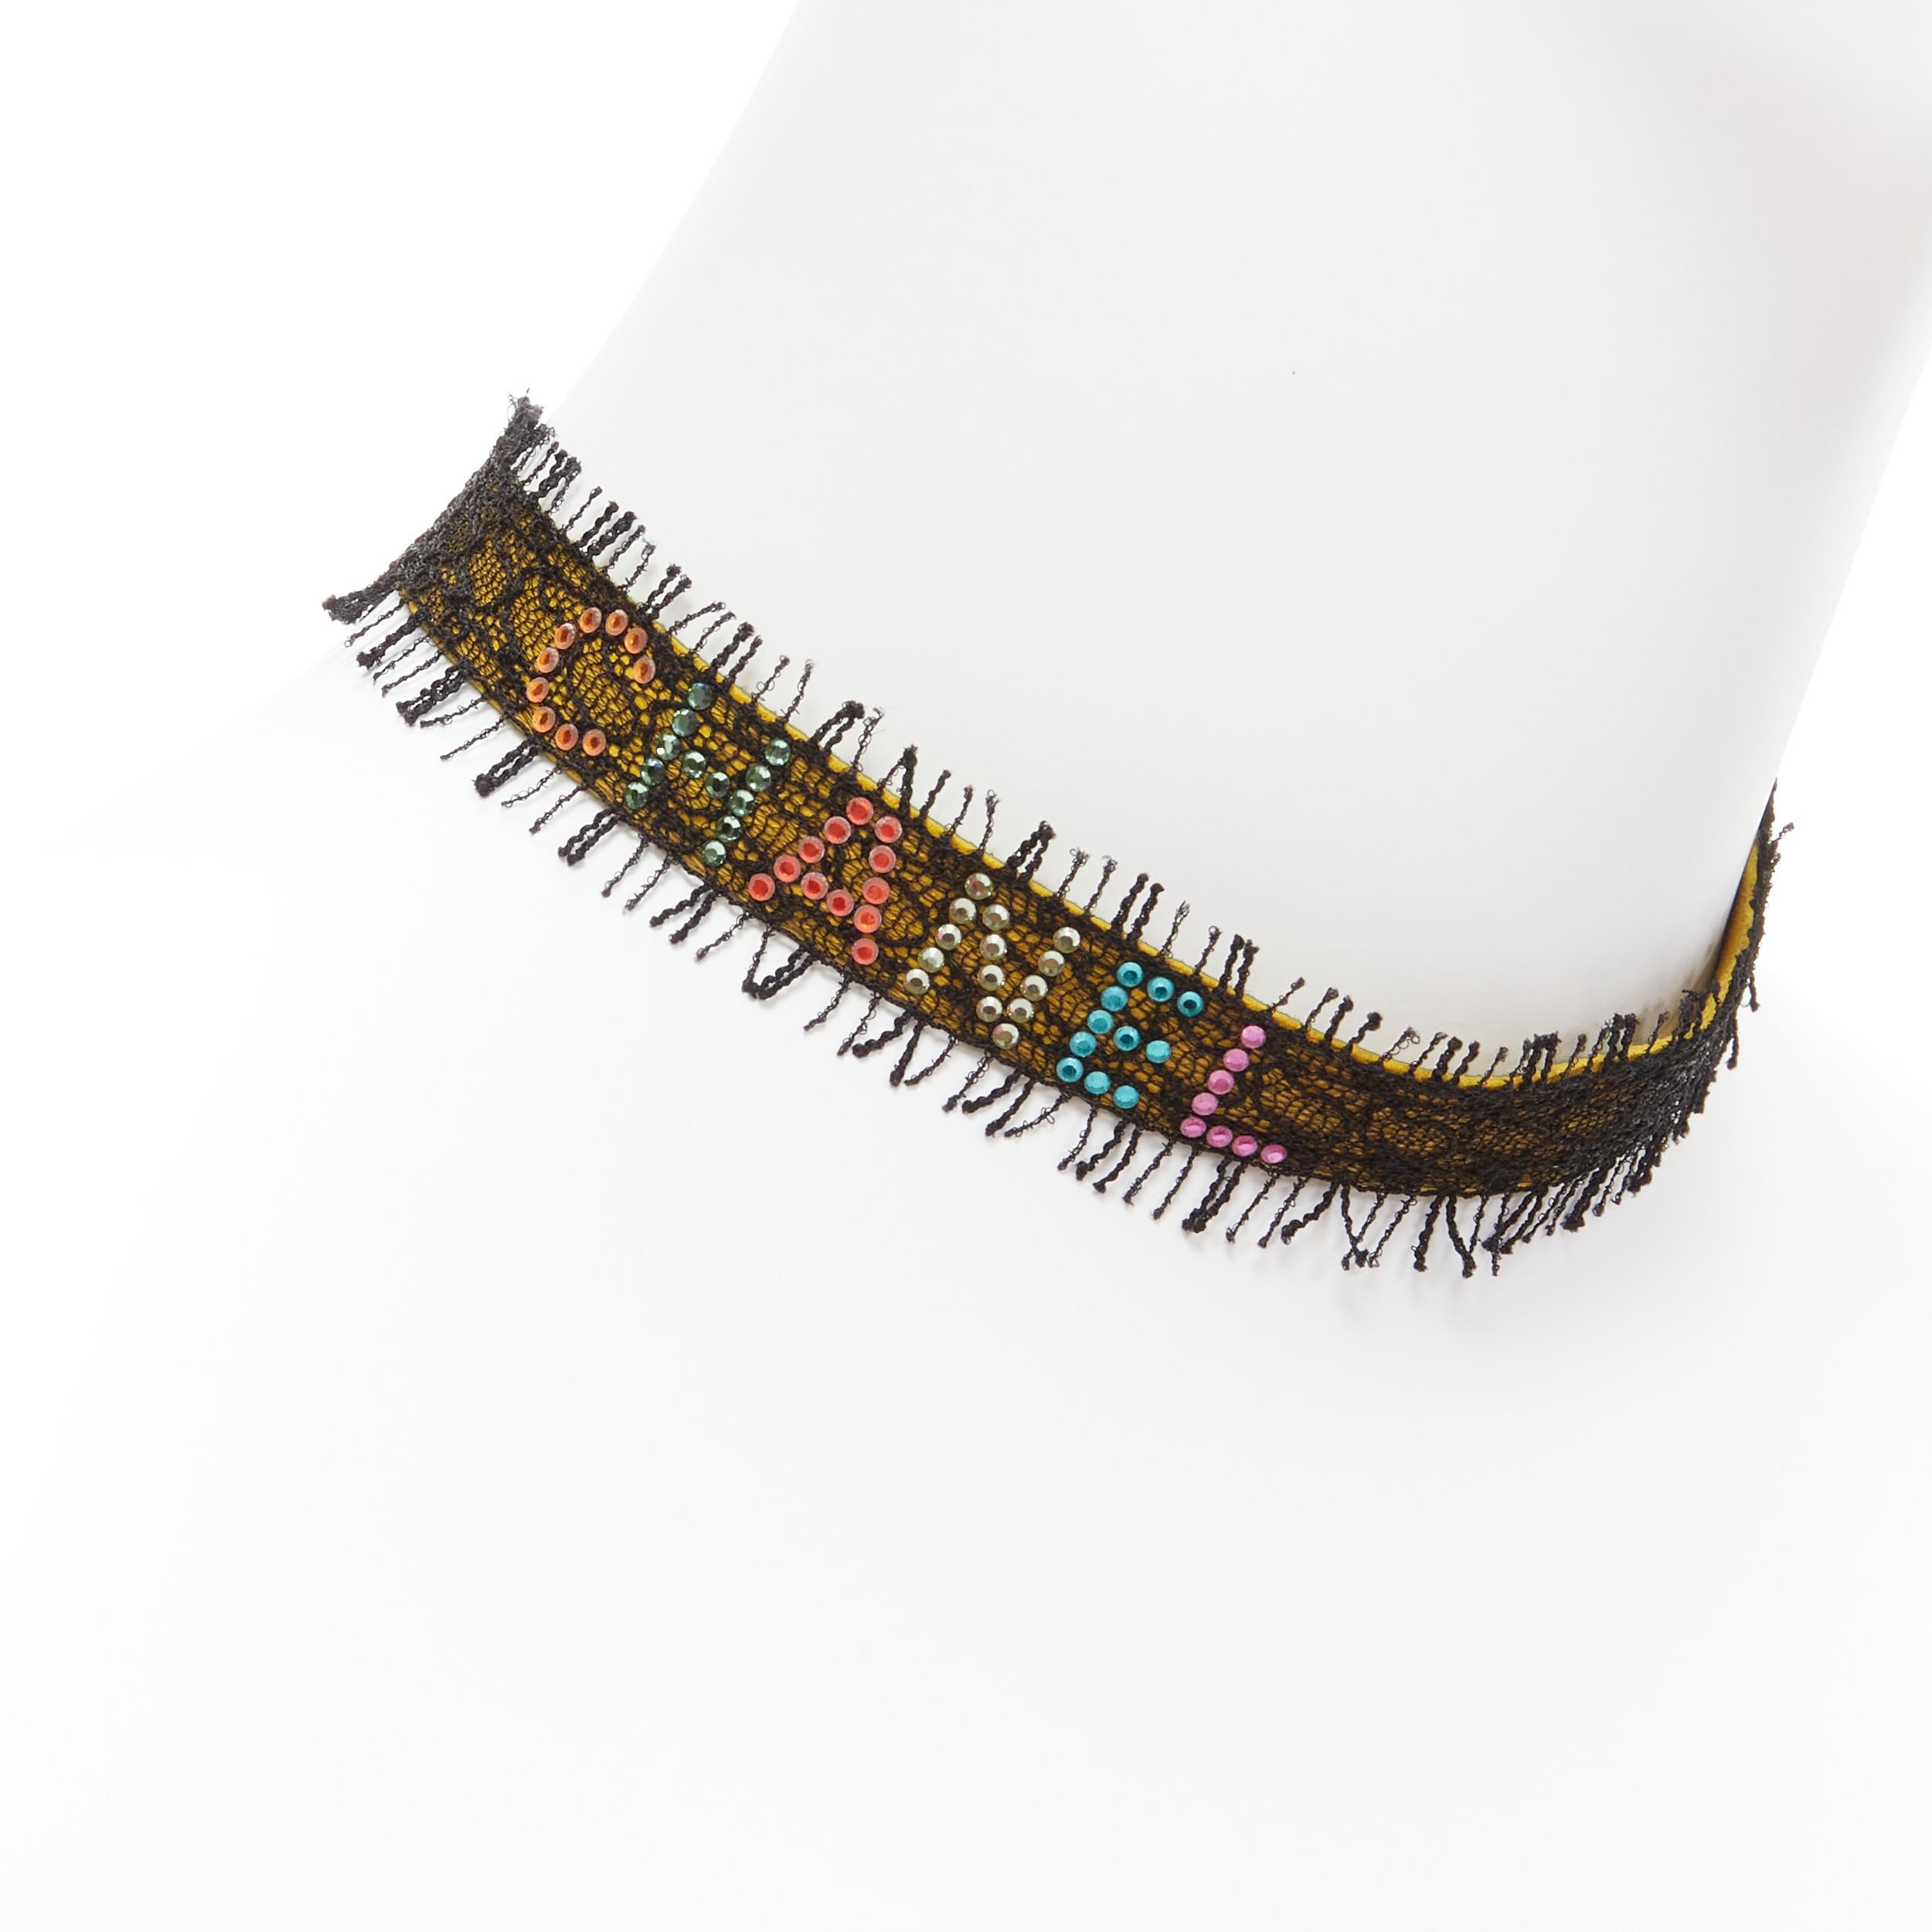 CHANEL 00T rainbow crystal CC logo black lace yellow suede choker necklace
Reference: TGAS/C02034
Brand: Chanel
Designer: Karl Lagerfeld
Collection: 00T
Material: Metal, Lace
Color: Yellow, Multicolour
Pattern: Lace
Closure: Lobster Clasp
Lining: